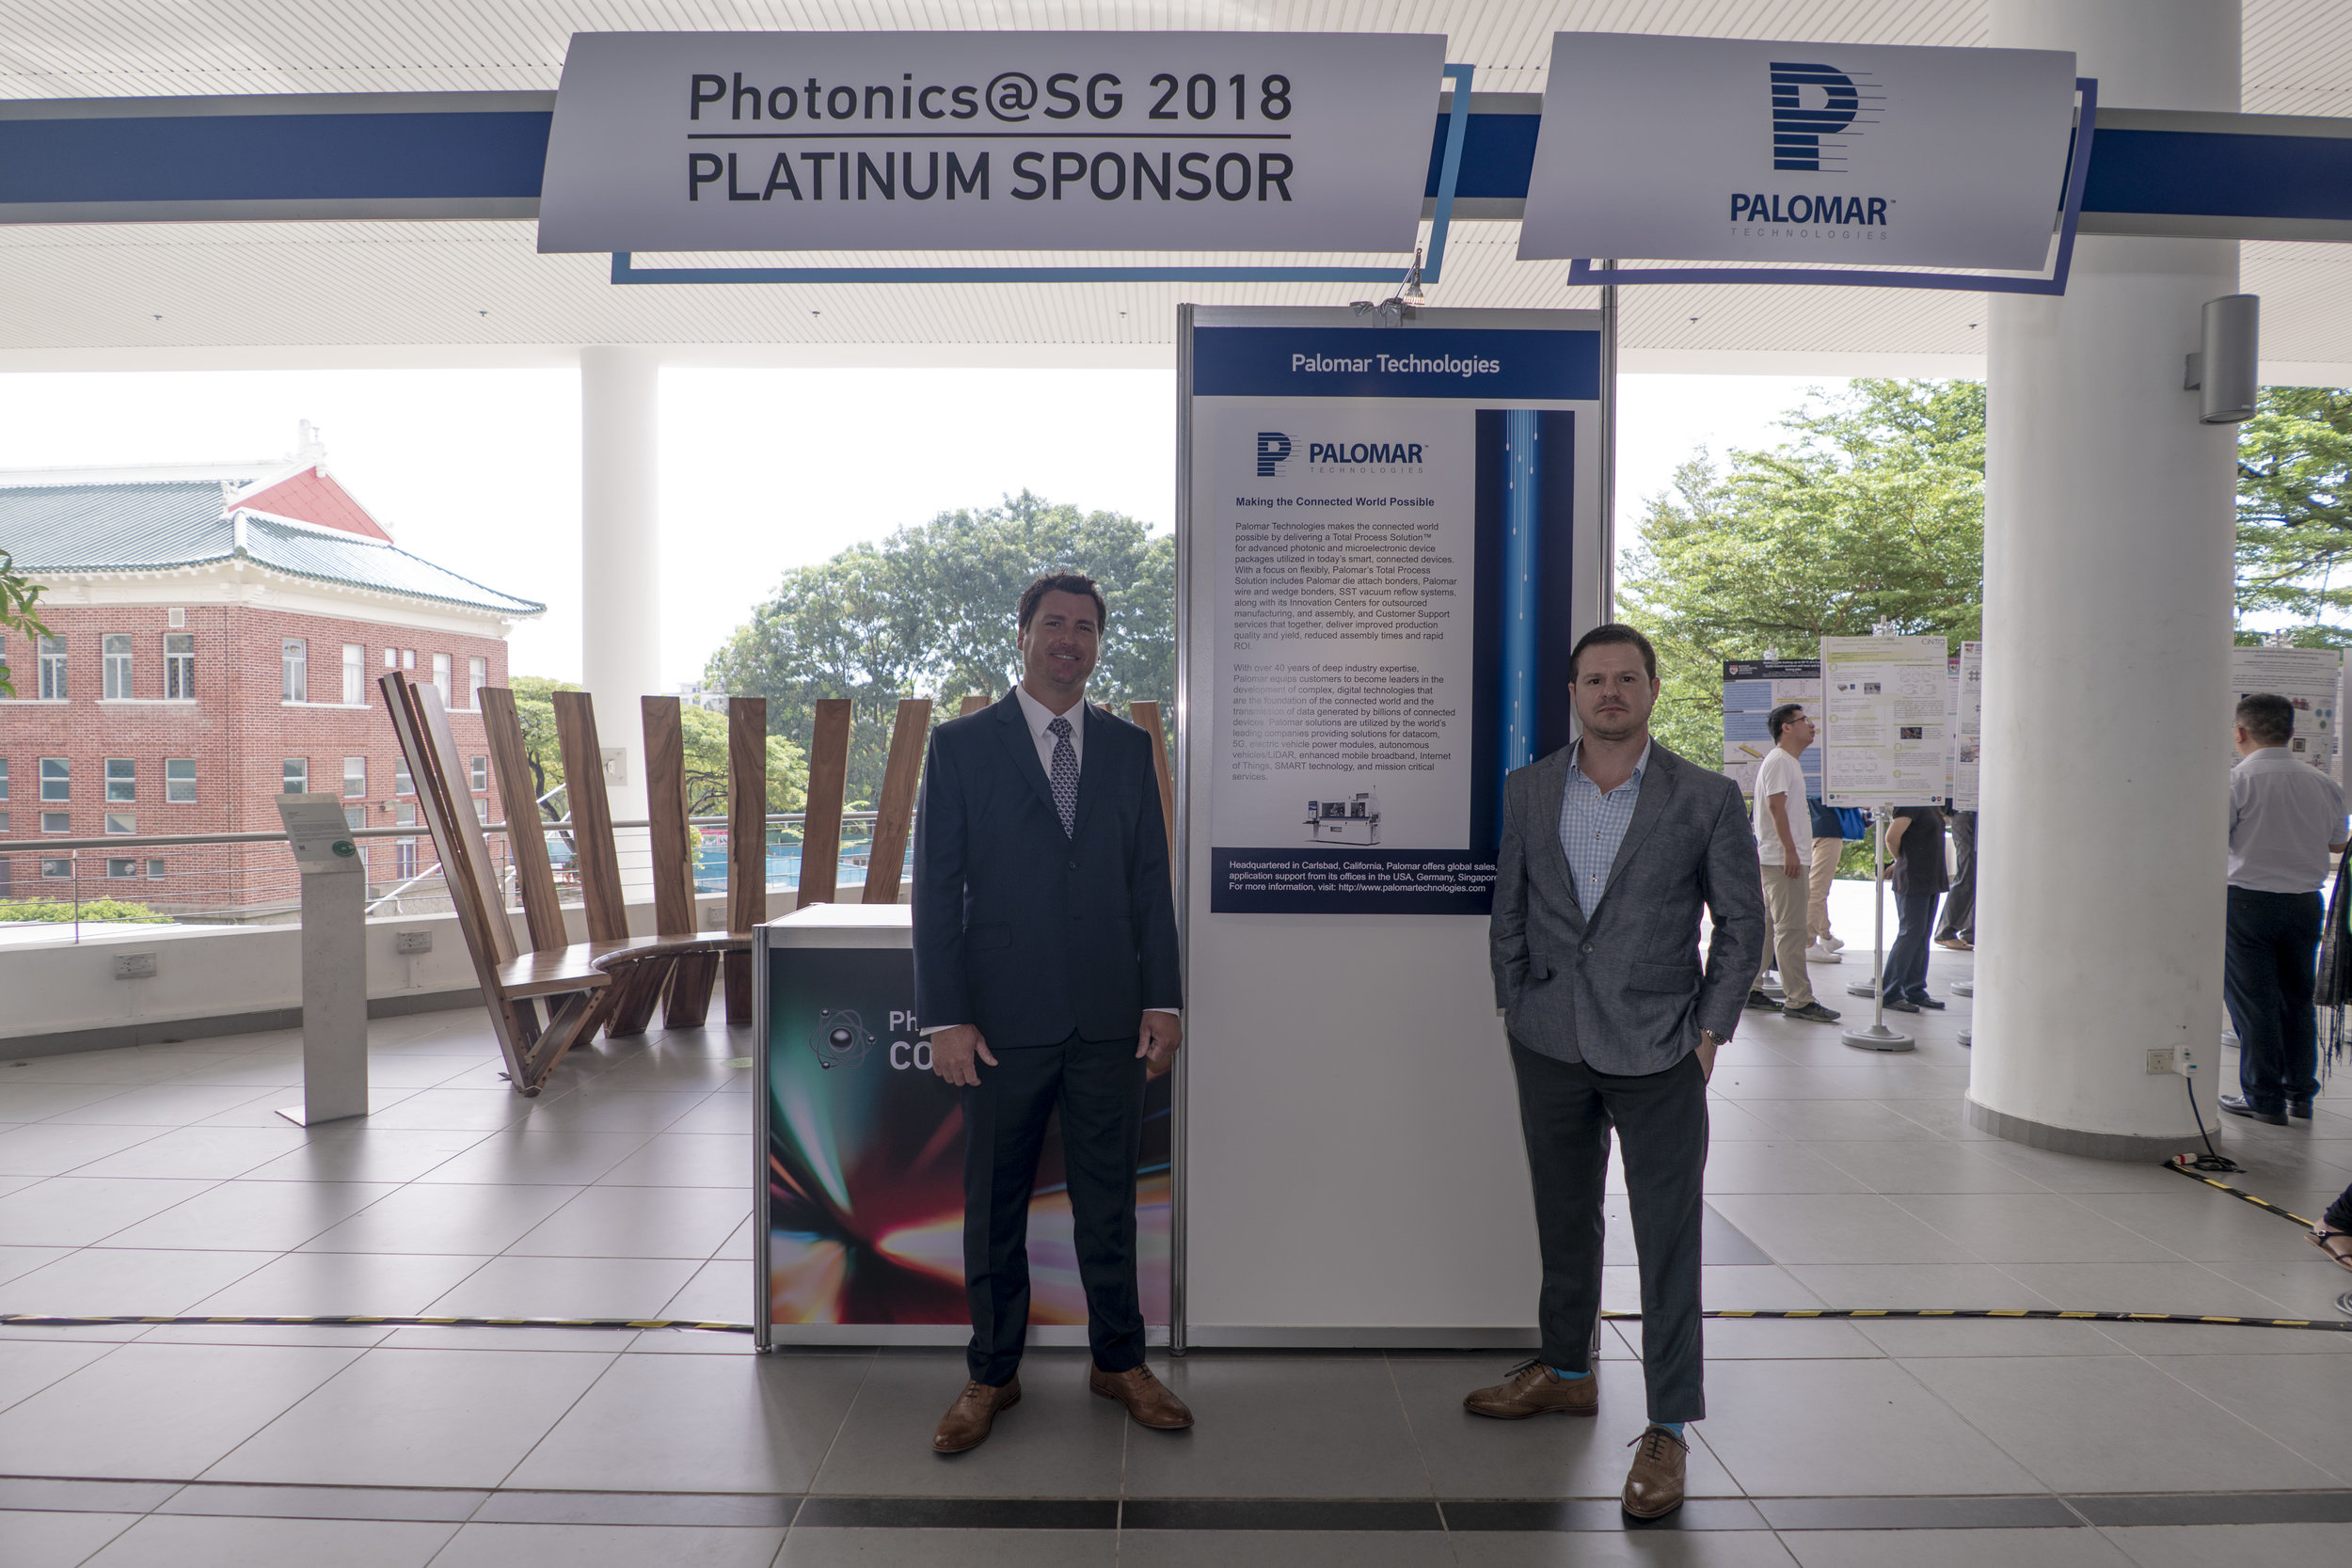 TPI Photonics SG 2018 Conference n Exhibition 0211rc.jpg